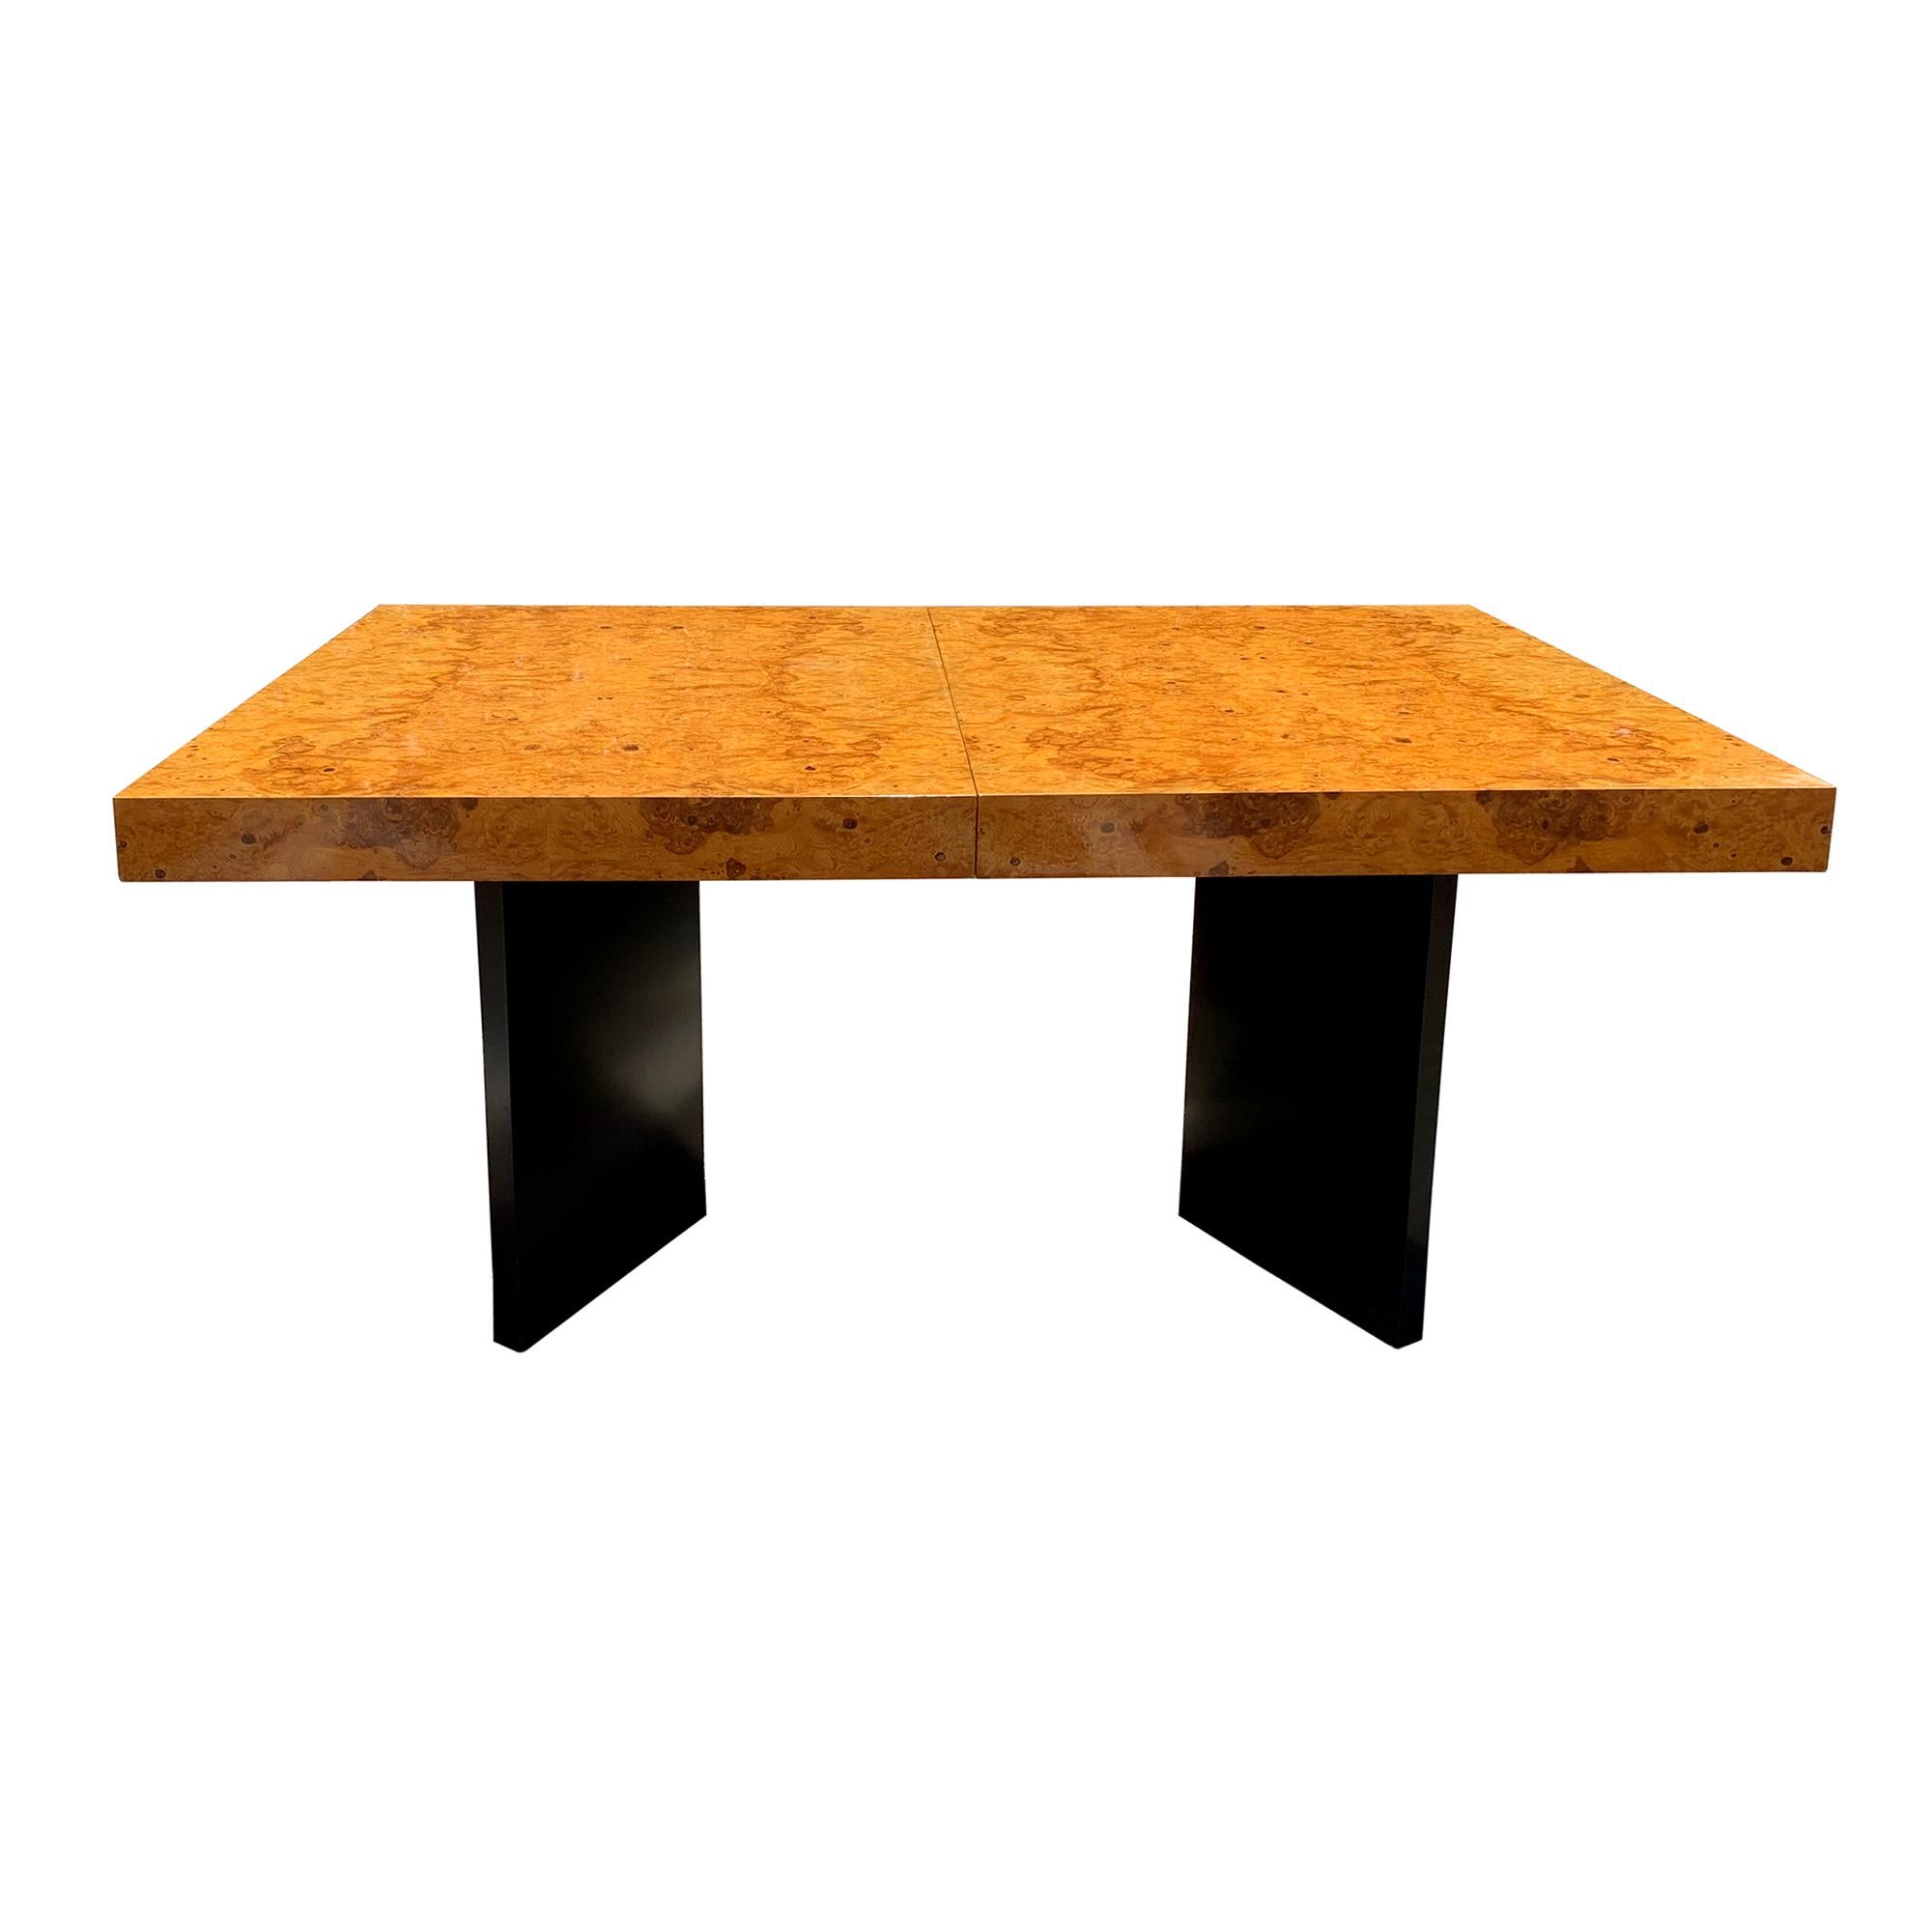 Late 20th Century Mid-Century Modern Olive Burl Wood Extension Dining Table W/ 2 Leaves For Sale